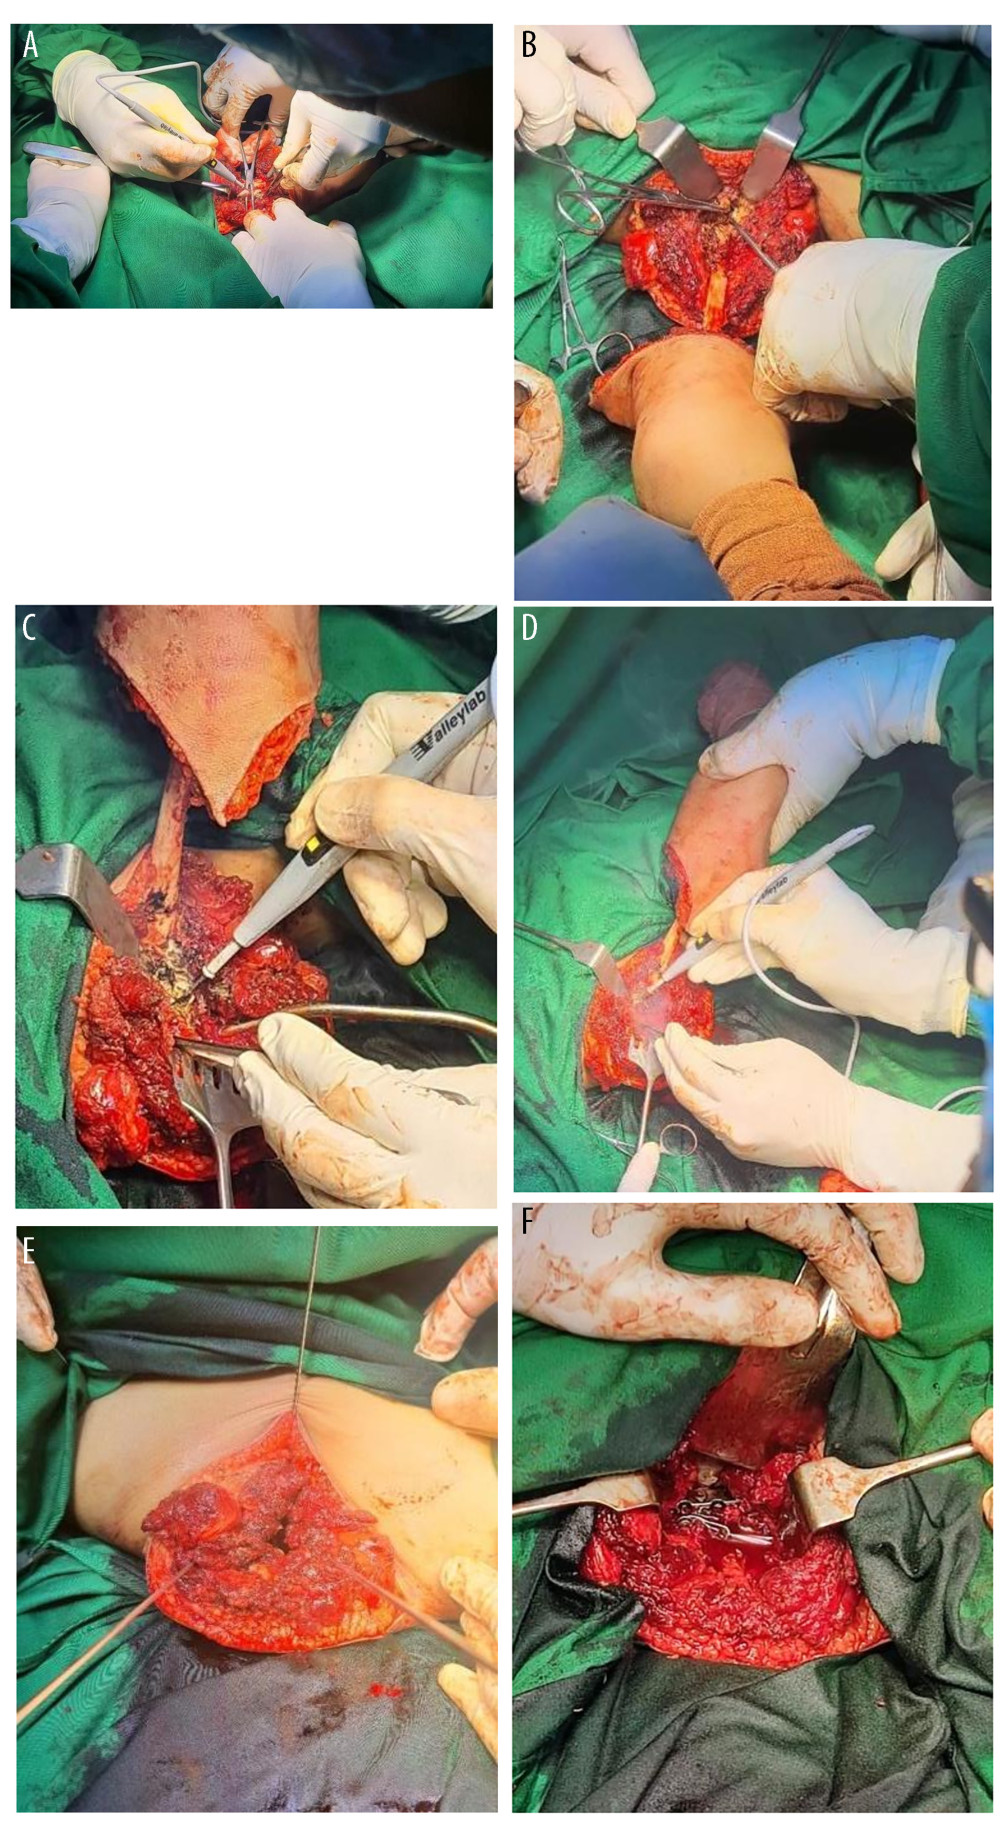 (A–F) Intra-operative views of non-functioning third limb disarticulation.